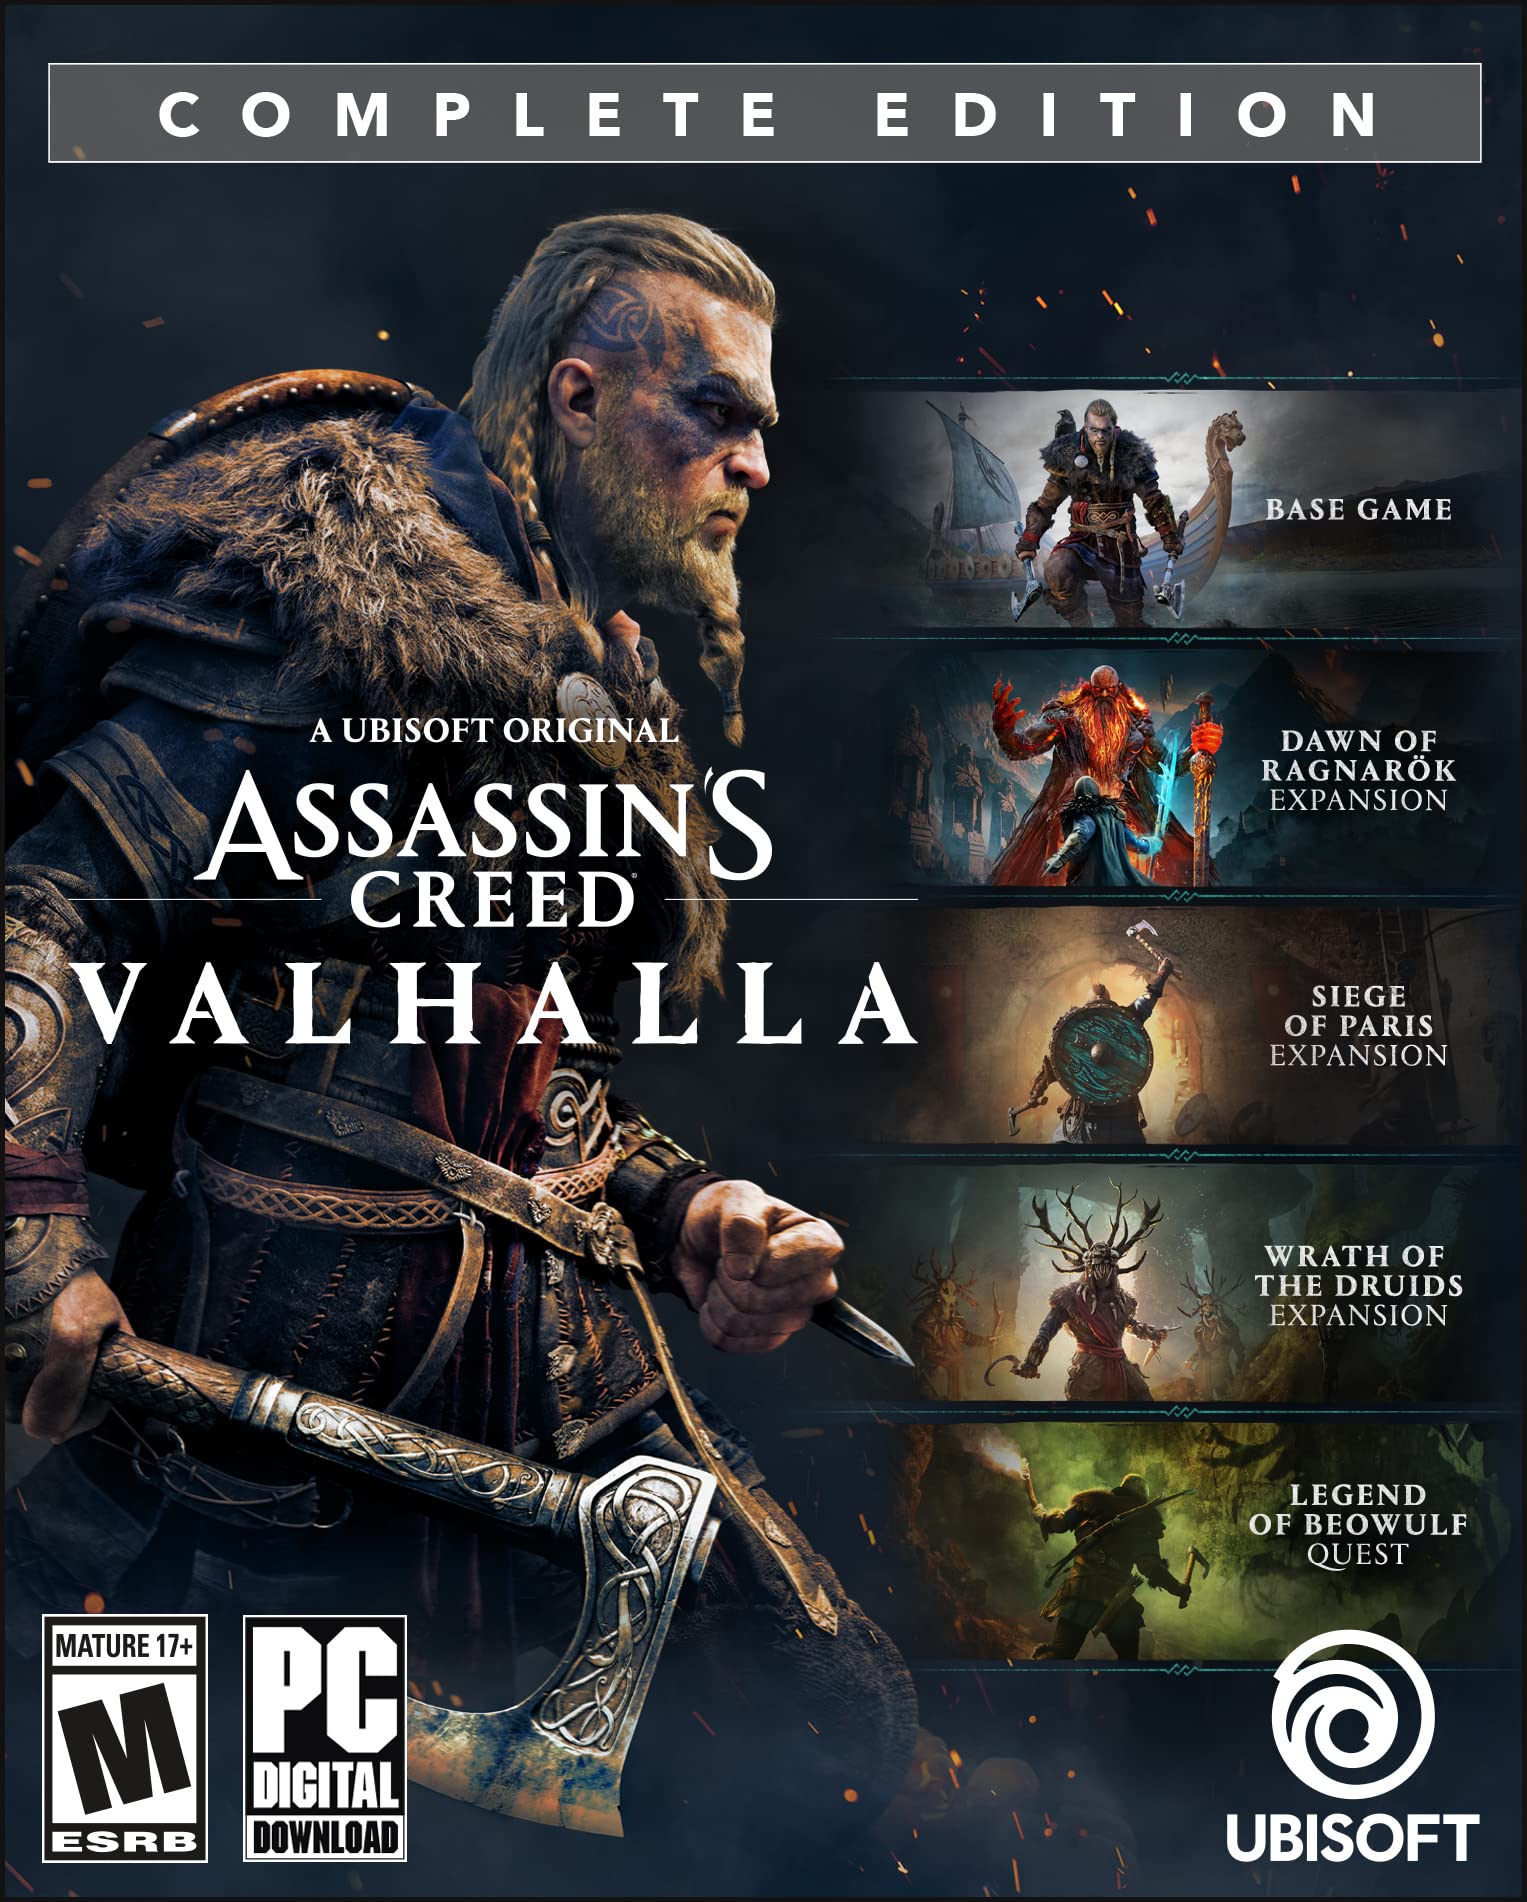 Assassin's Creed Valhalla: Complete Edition | PC Code - Ubisoft Connect